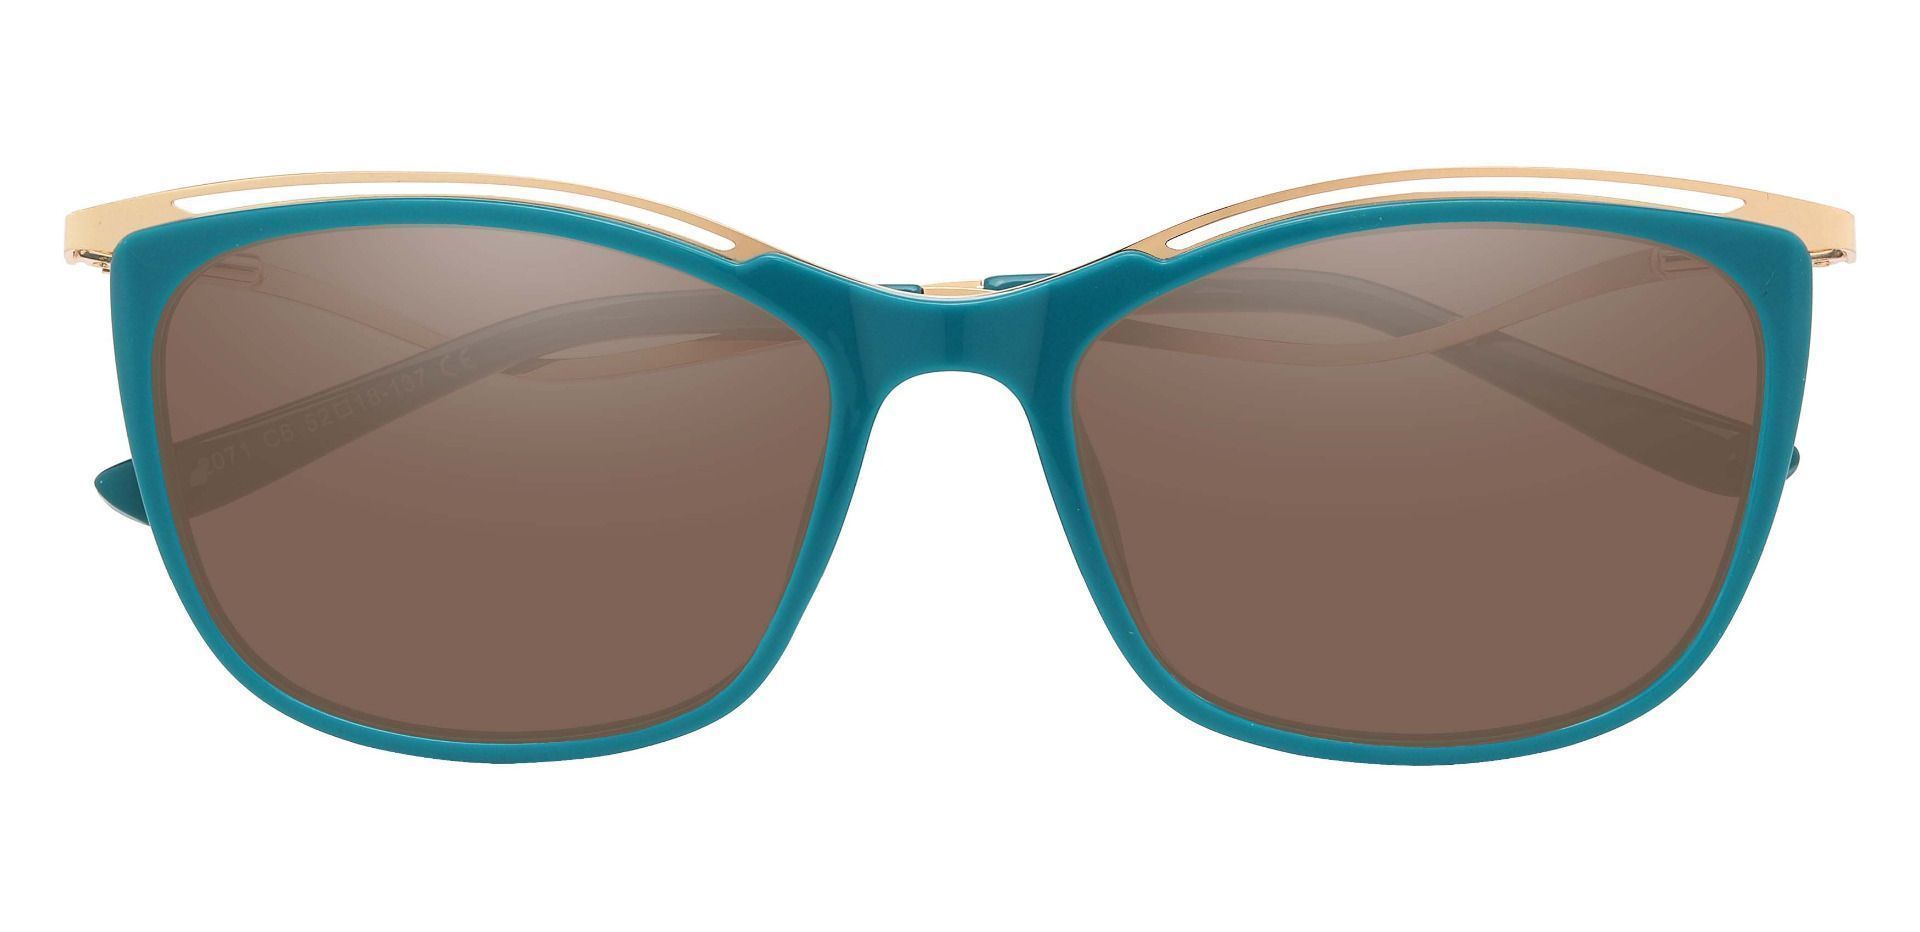 Enola Cat Eye Non-Rx Sunglasses - Green Frame With Brown Lenses